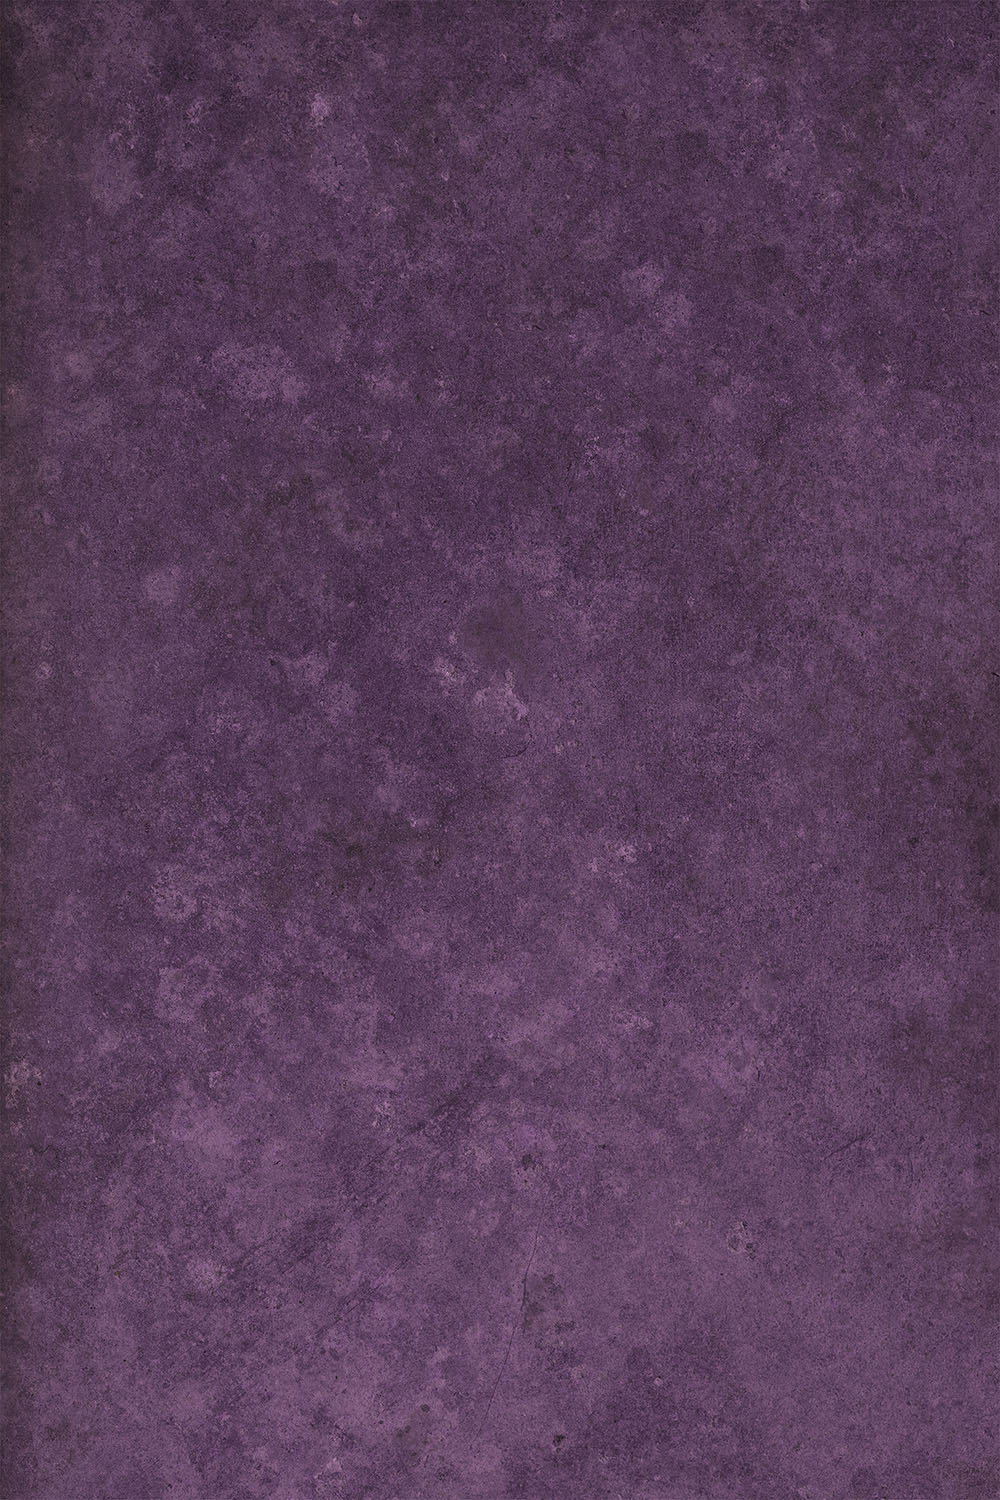 Purple photography surface with a lot of texture printed on vinyl